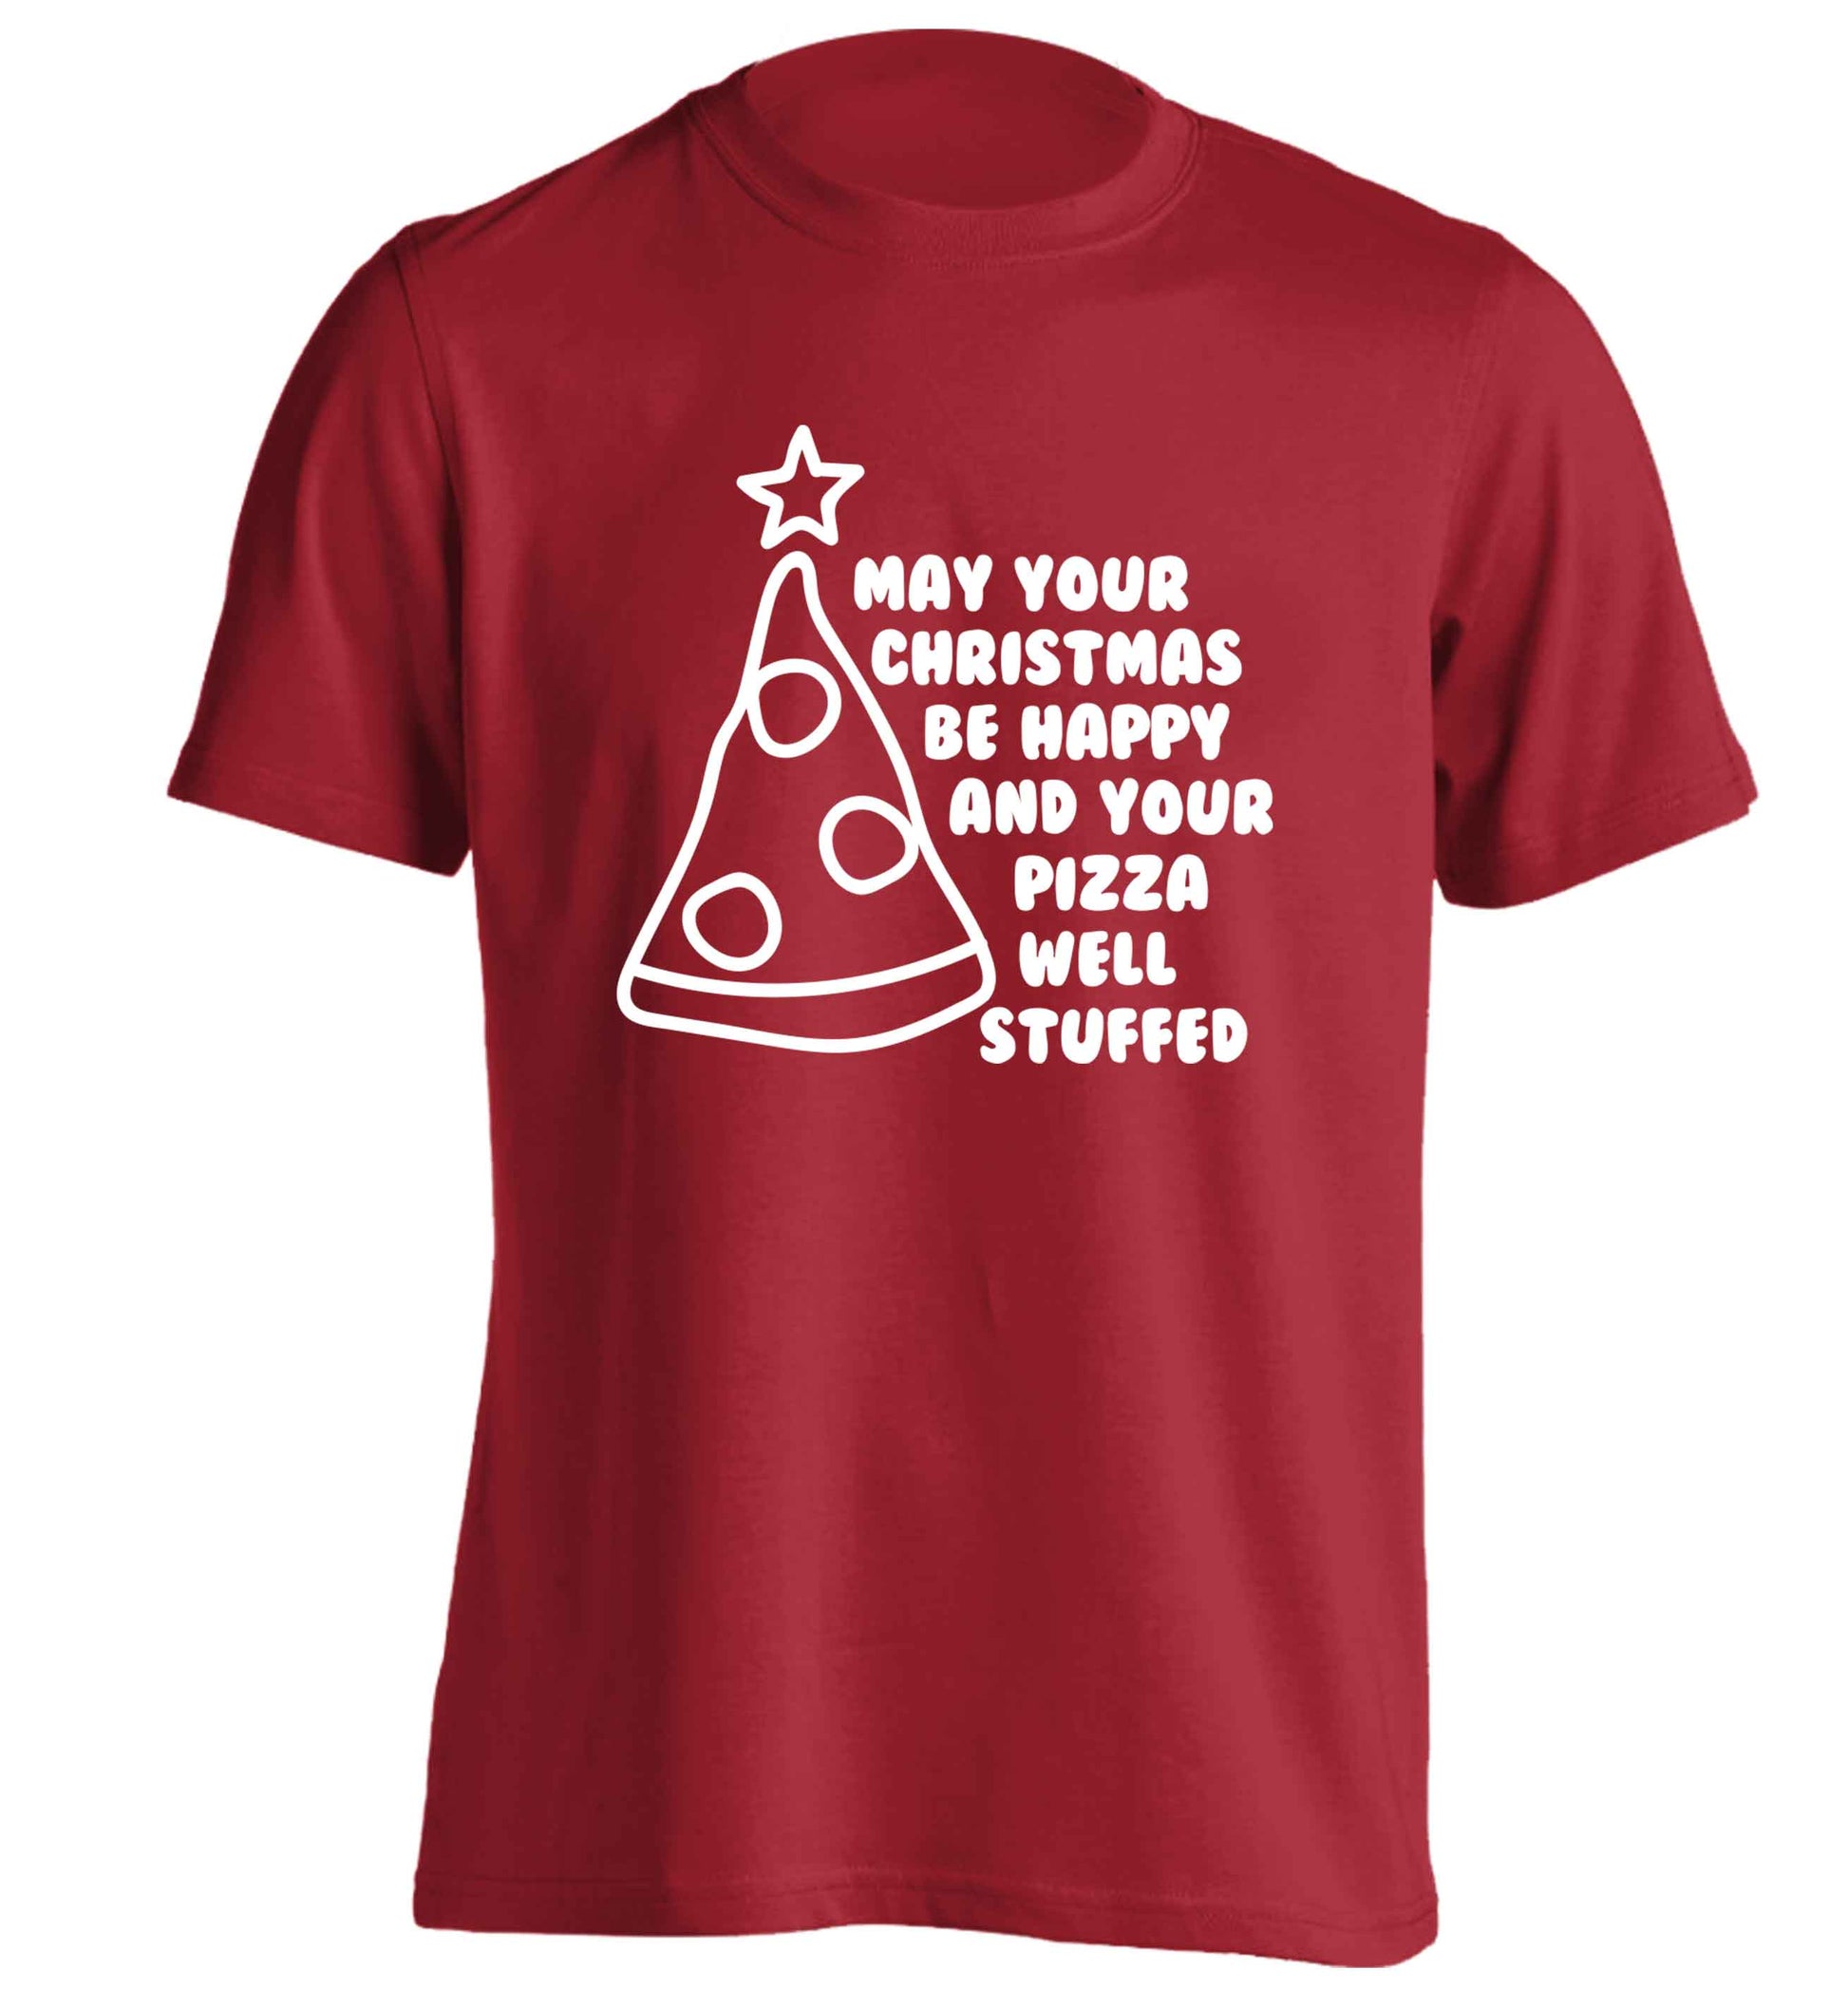 May your Christmas be happy and your pizza well stuffed adults unisex red Tshirt 2XL